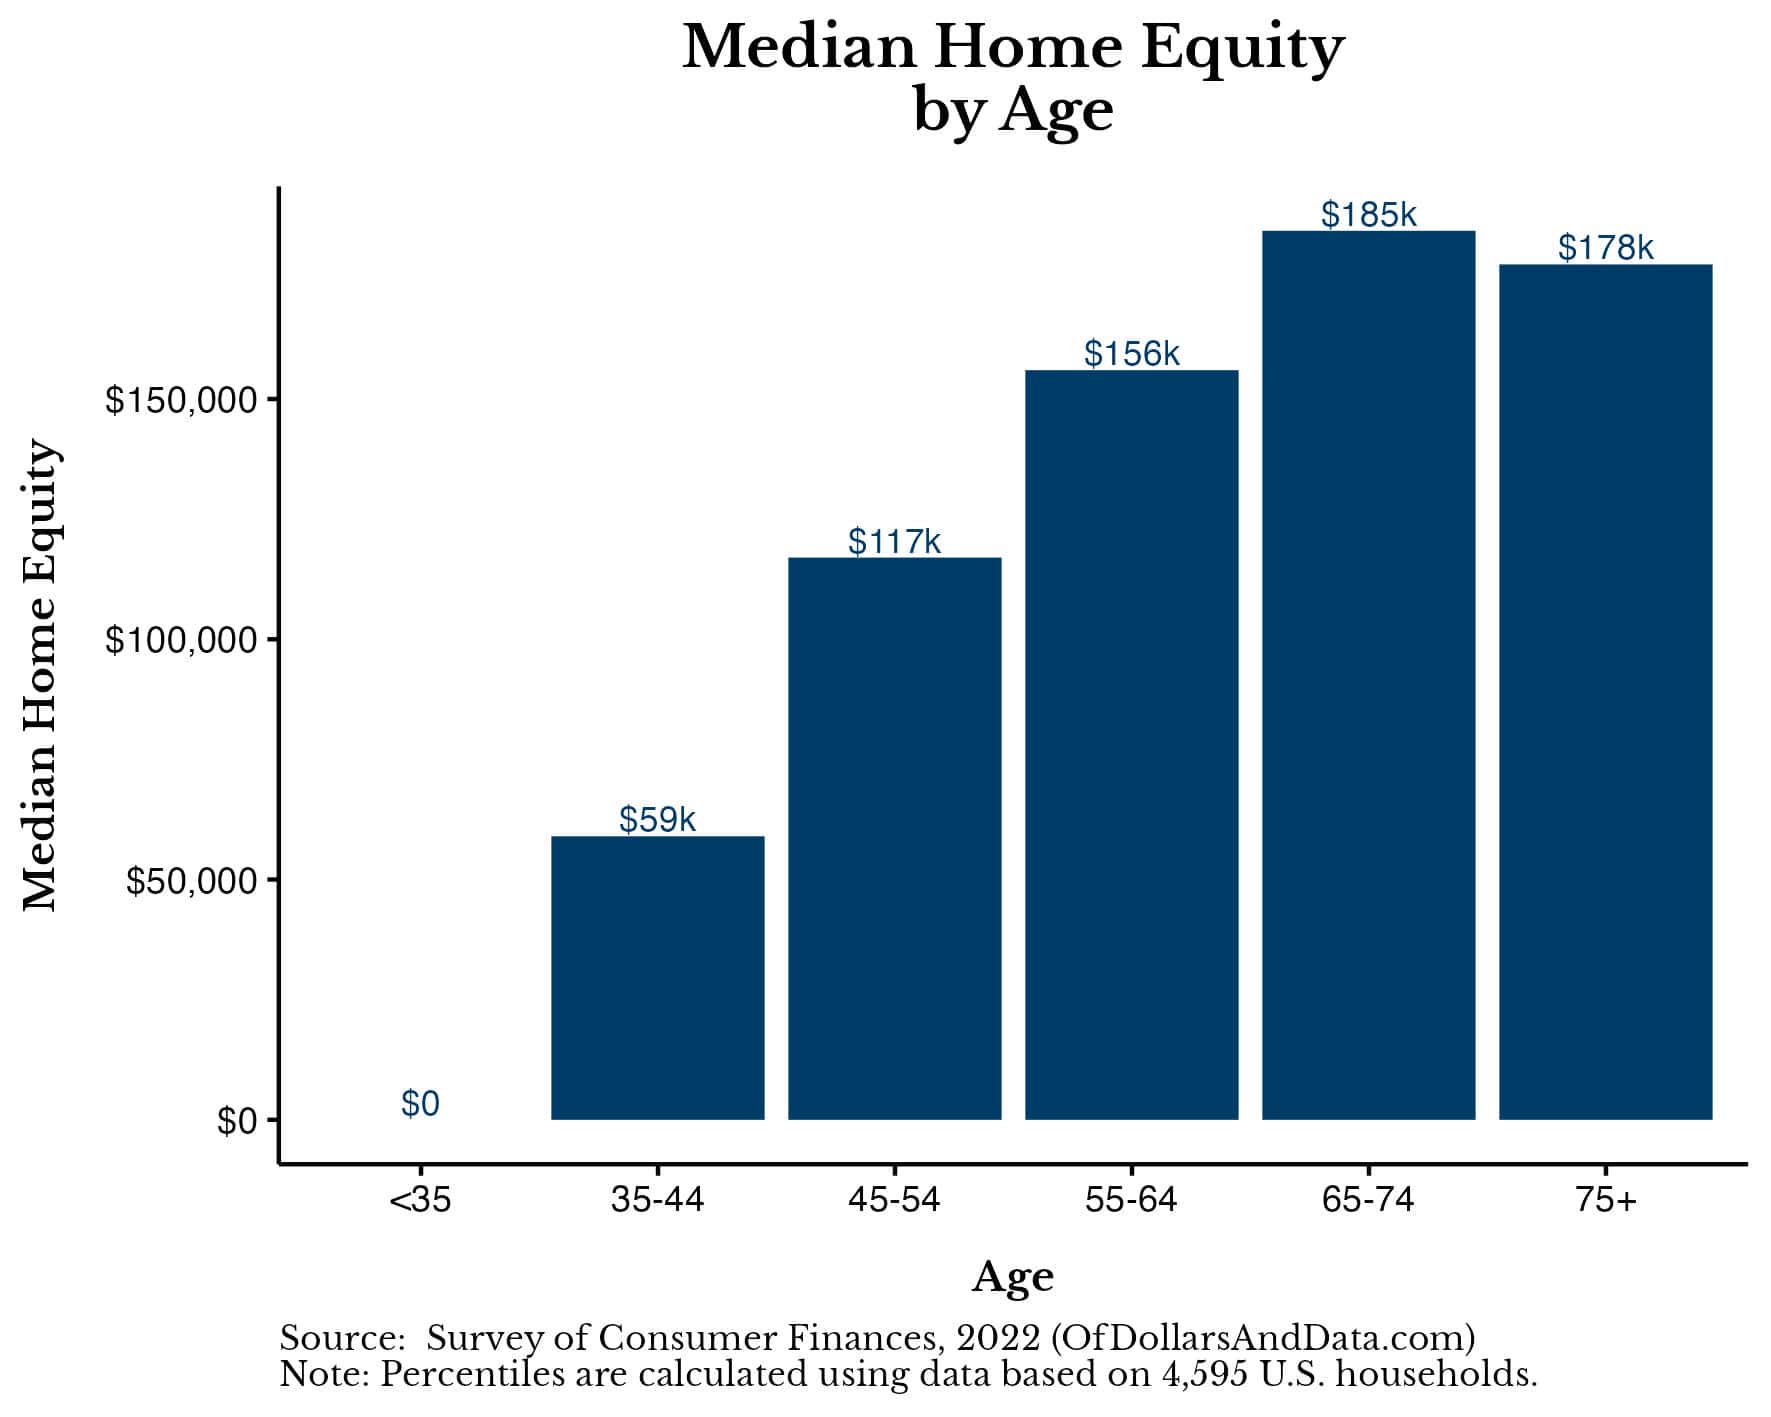 Chart showing the median home equity by age from the 2022 Survey of Consumer Finances.